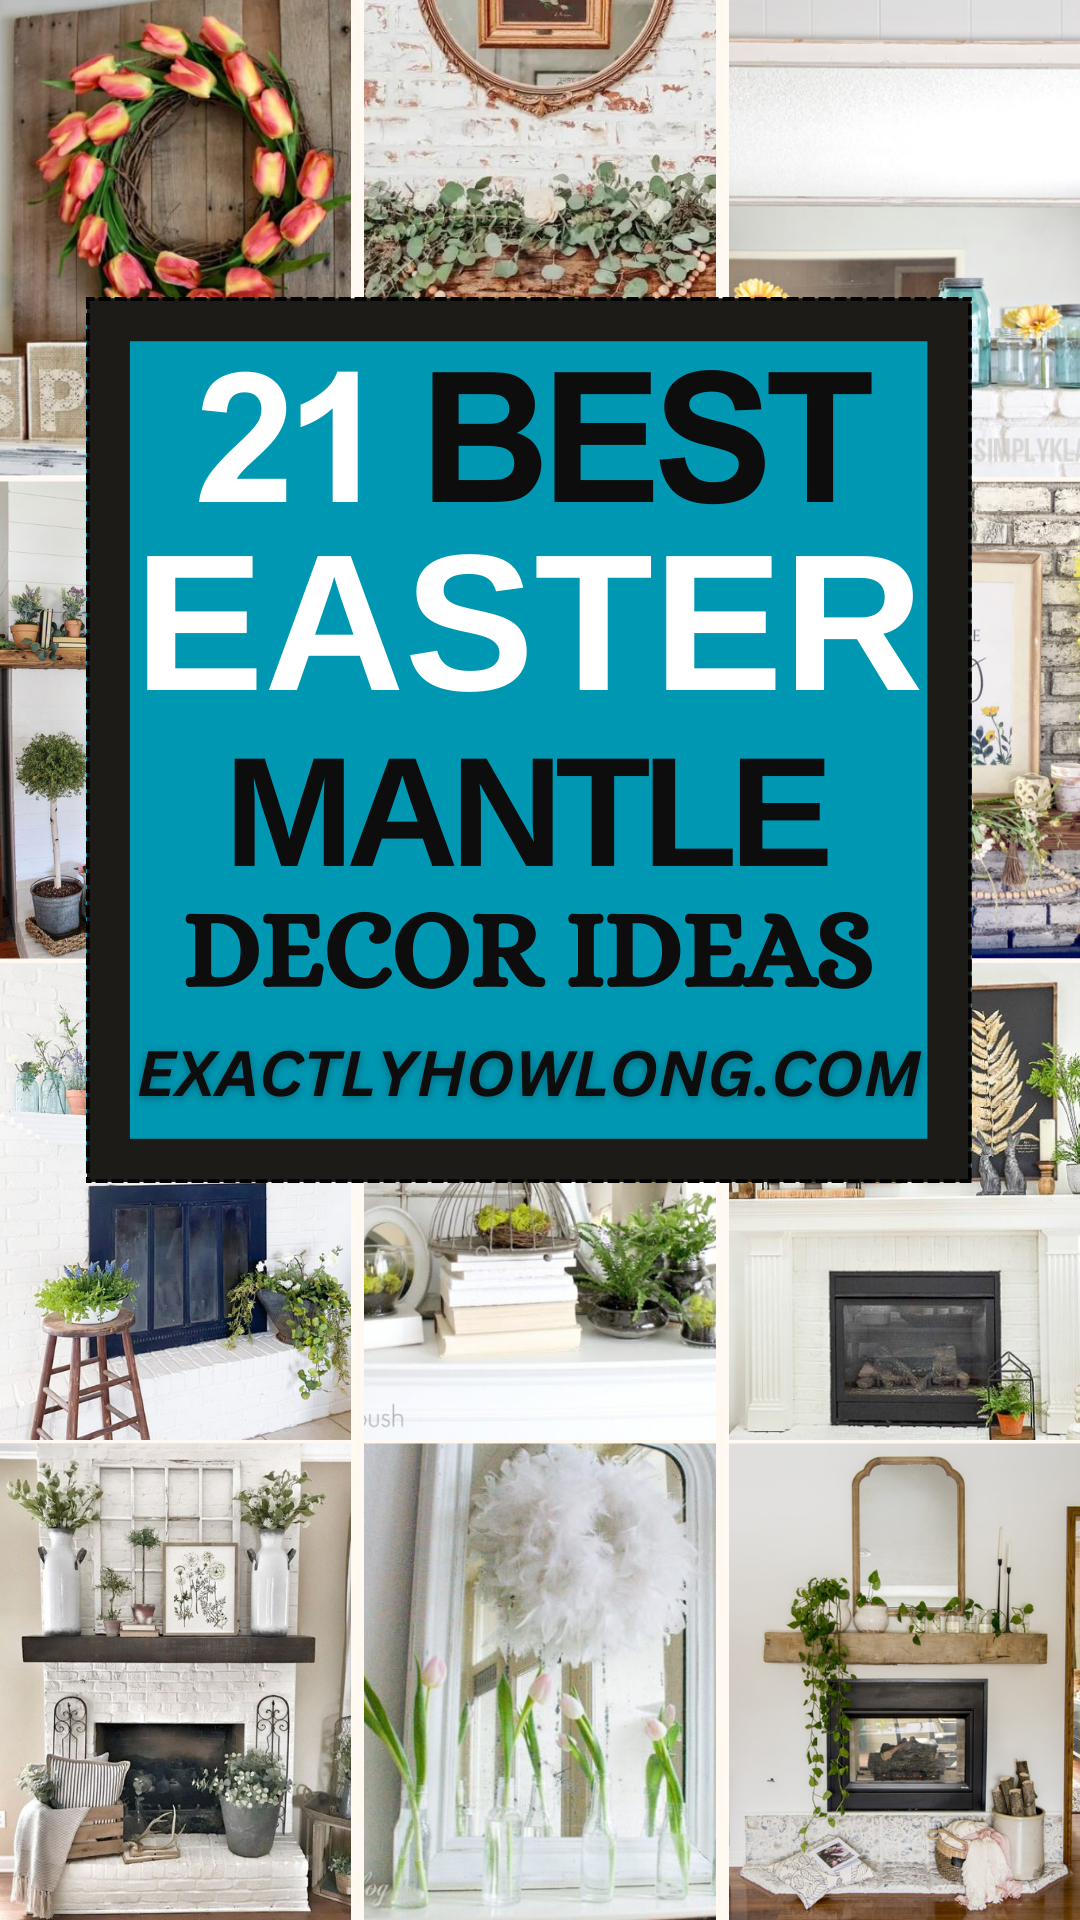 Decorate your mantle for spring with DIY decorations